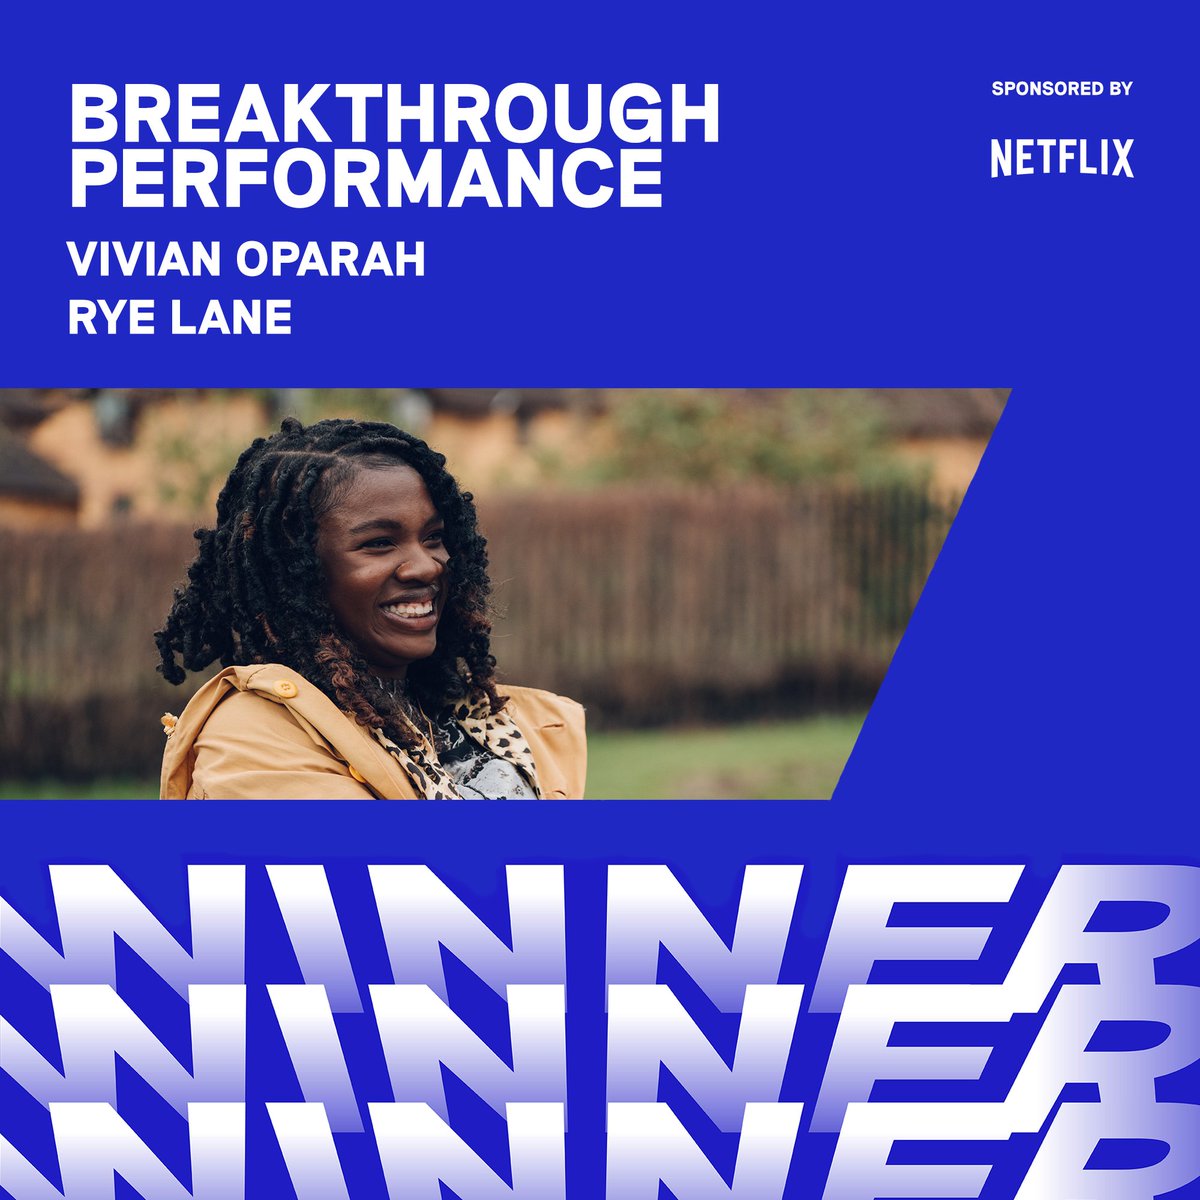 The #BIFA2023 award for Breakthrough Performance sponsored by Netflix goes to... Vivian Oparah (Rye Lane) For the full list of winners, check out bifa.film/awards/2023/wi…